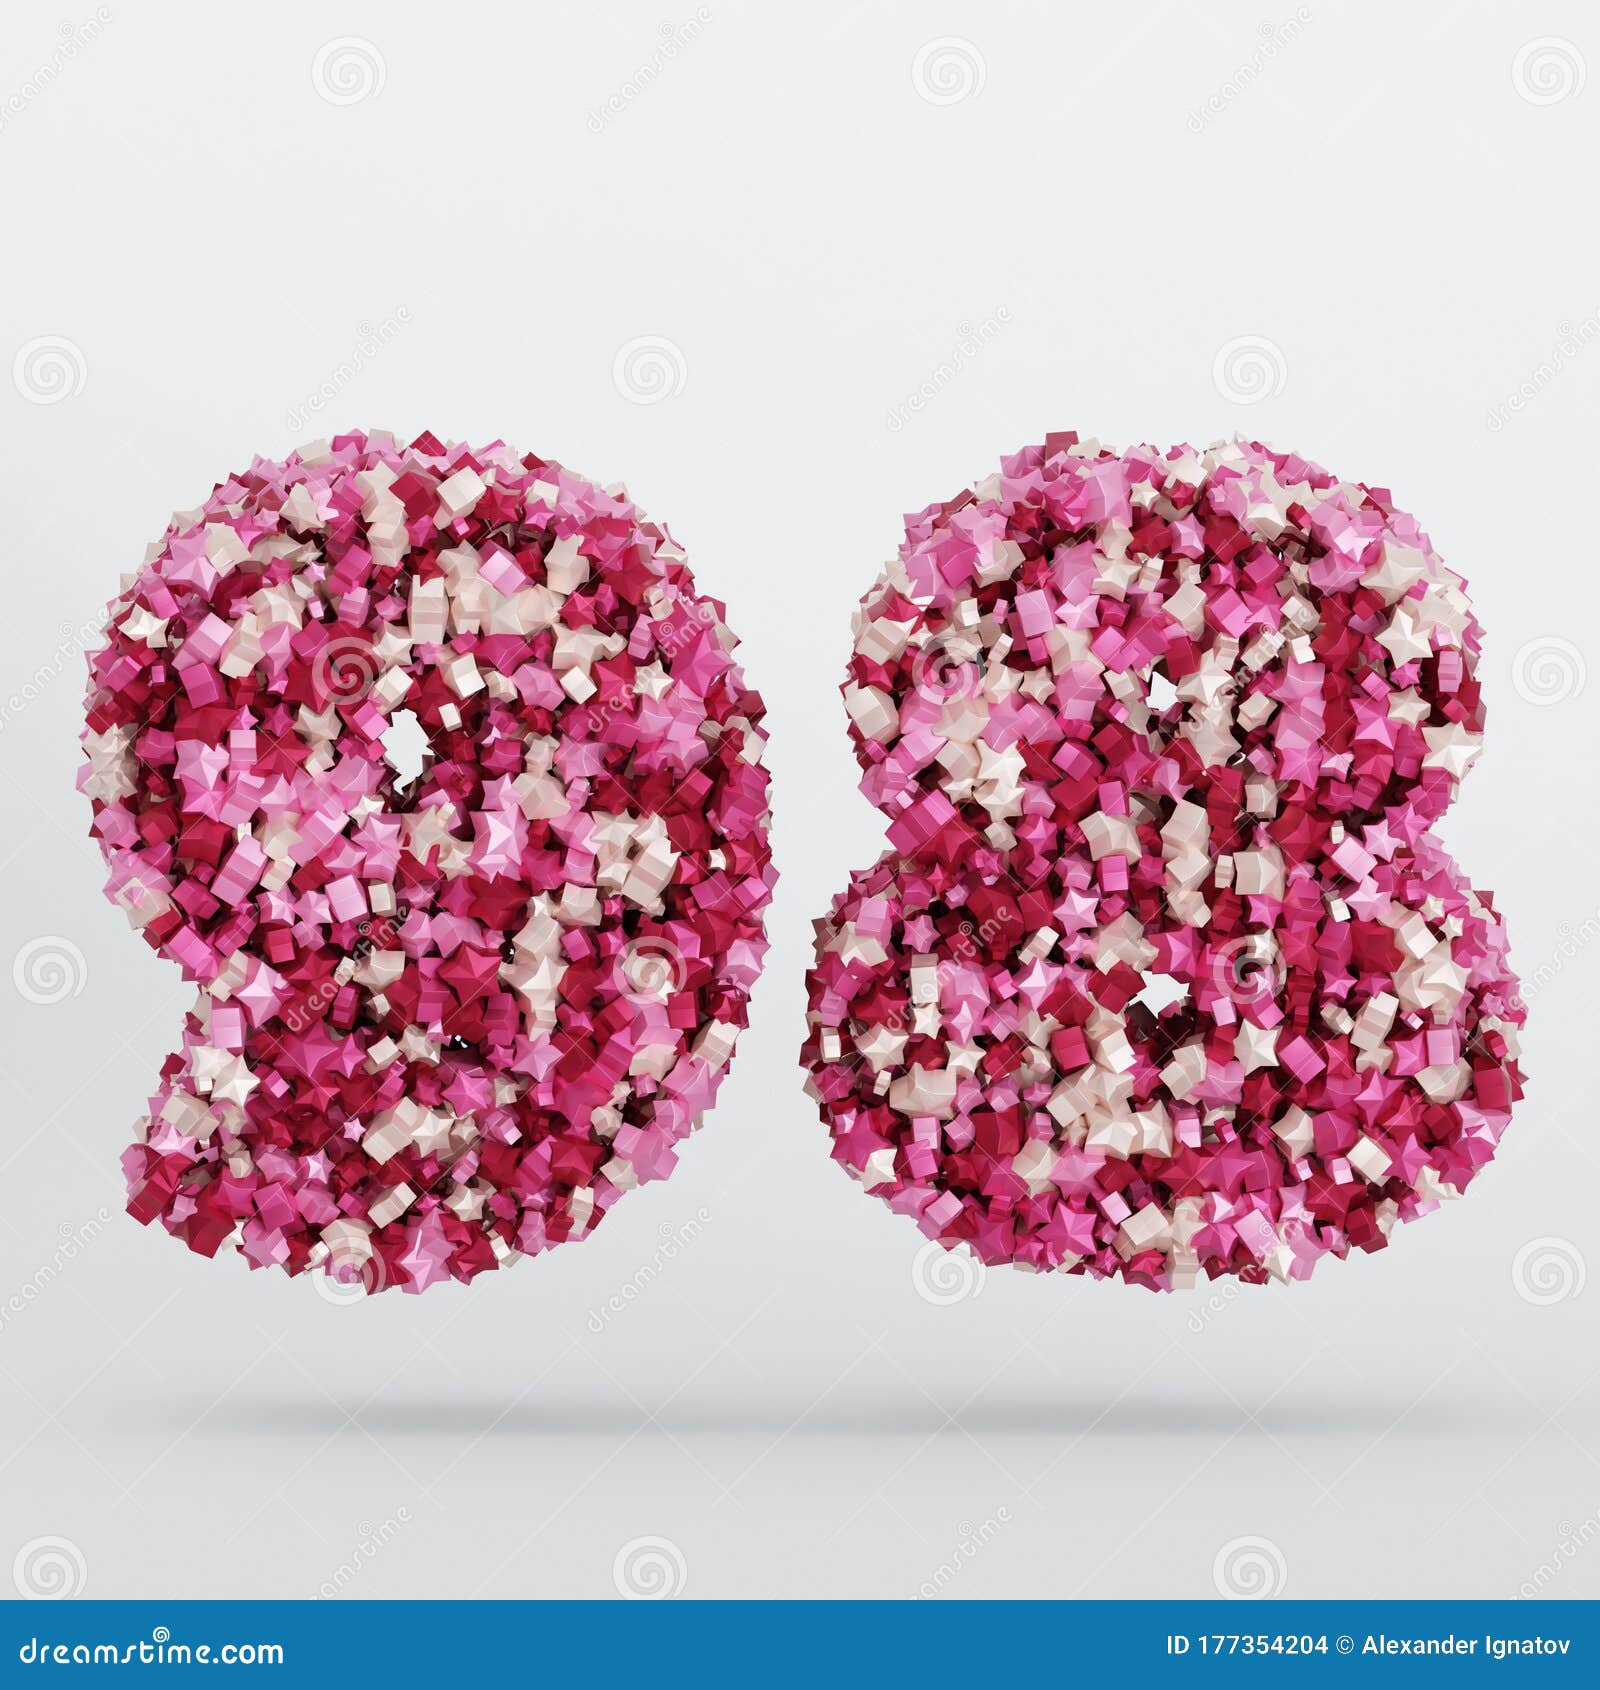 number-98-3d-text-illustration-digits-with-pink-and-cream-colors-stars